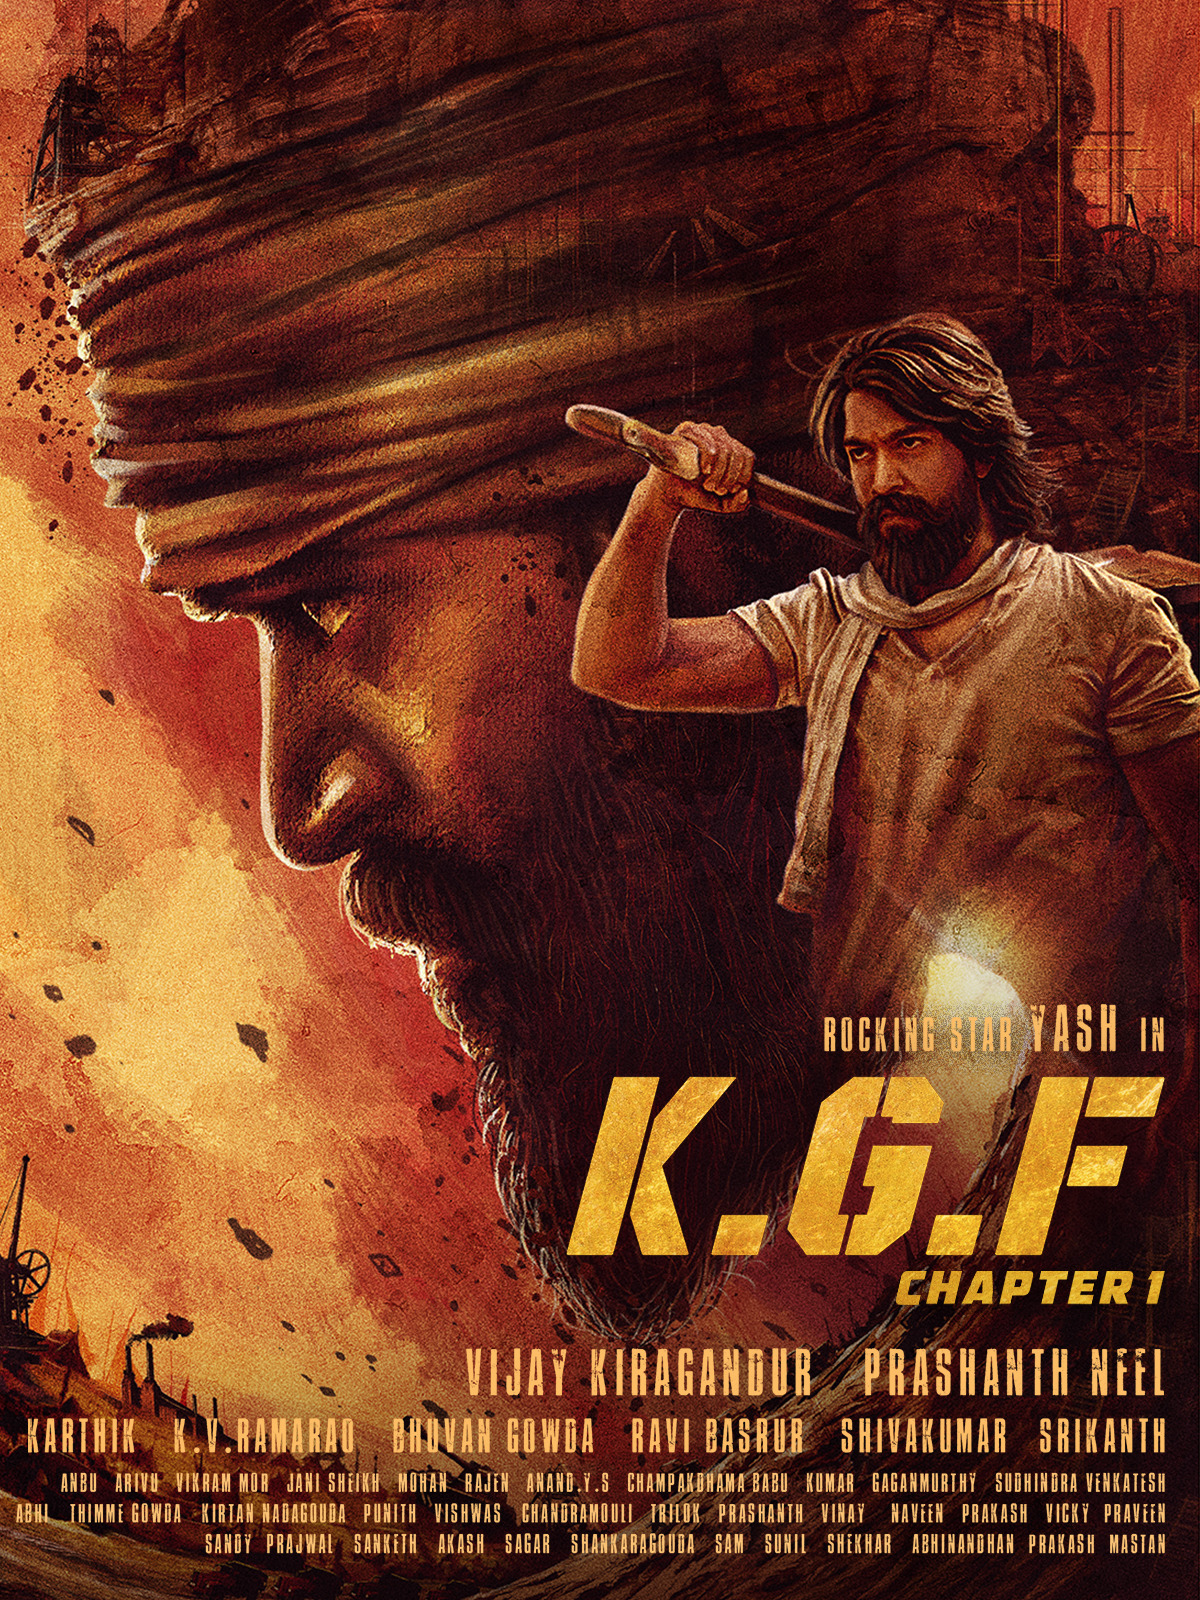 KGF Chapter 1 (2018) South Hindi Dubbed Full Movie HD ESub